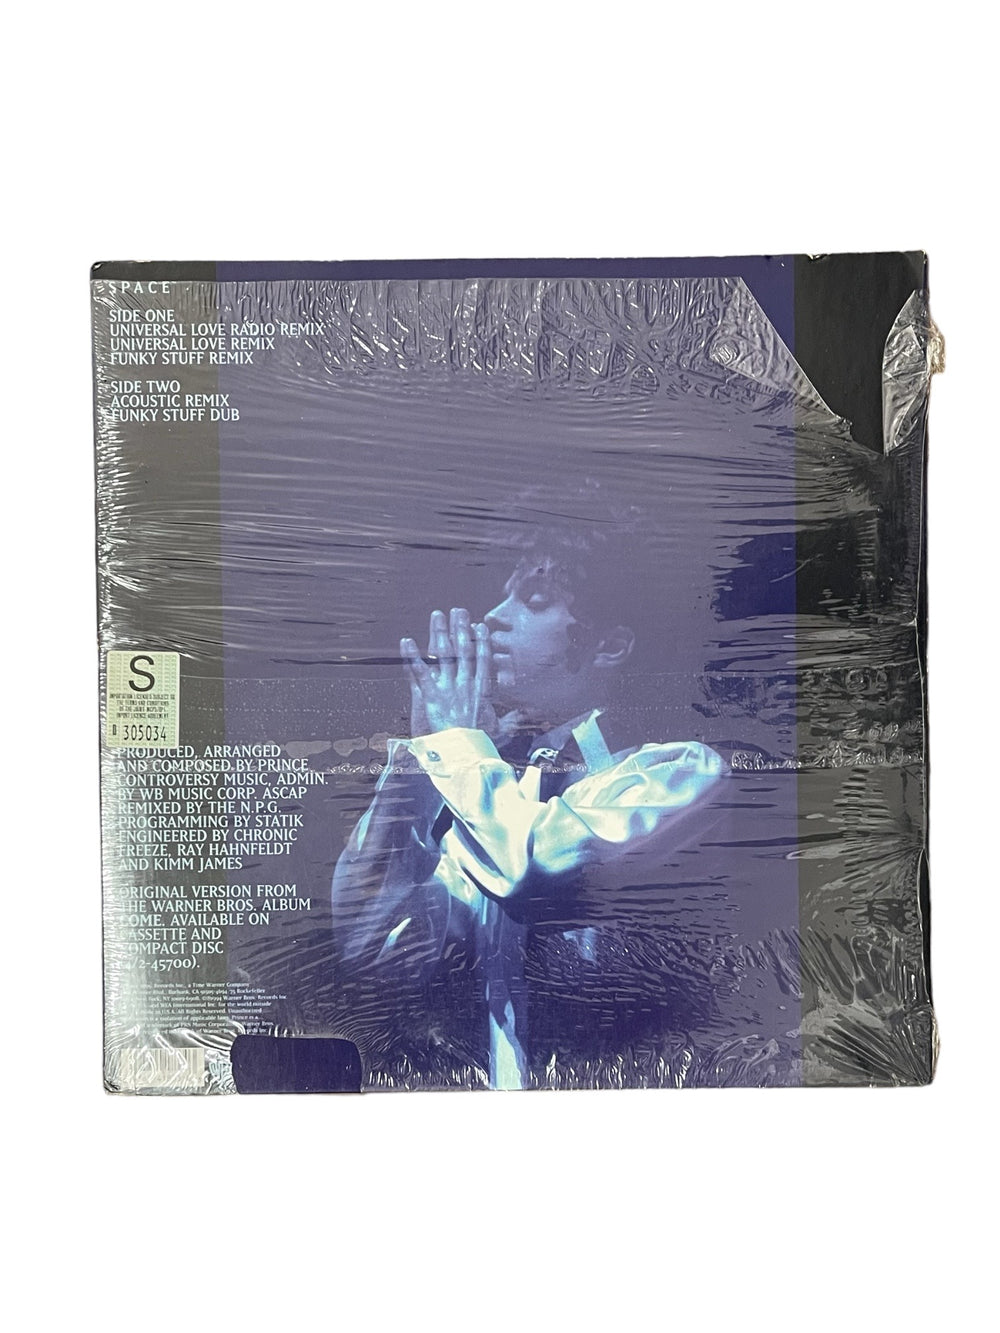 Prince – SPACE 12 INCH VINYL USA  PICTURE SLEEVE SEALED TO 3 SIDES